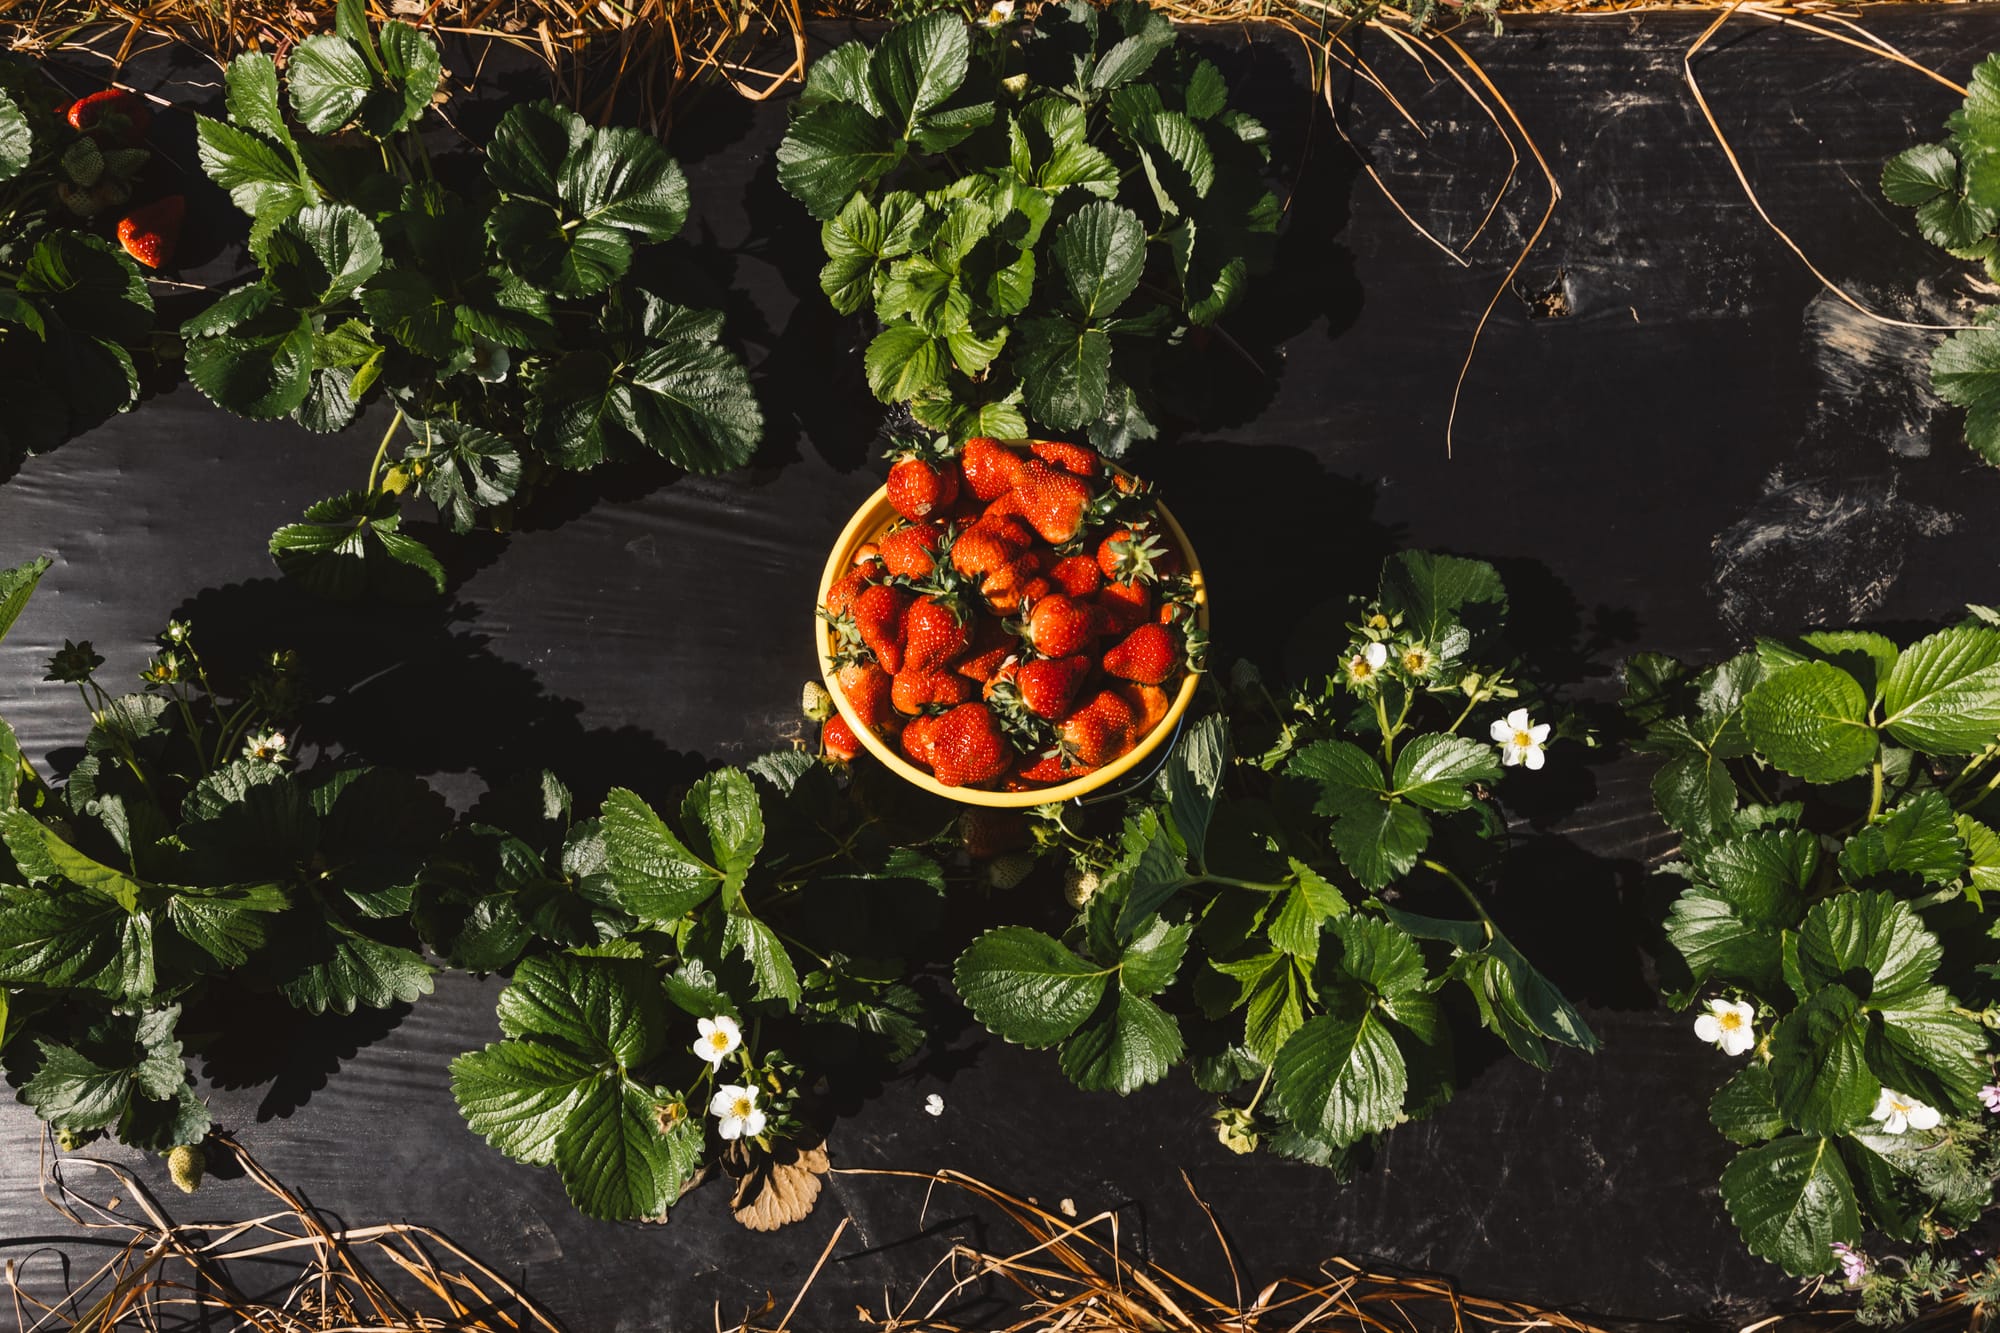 Aubie Smith's strawberries and the many sweet reasons we buy them.